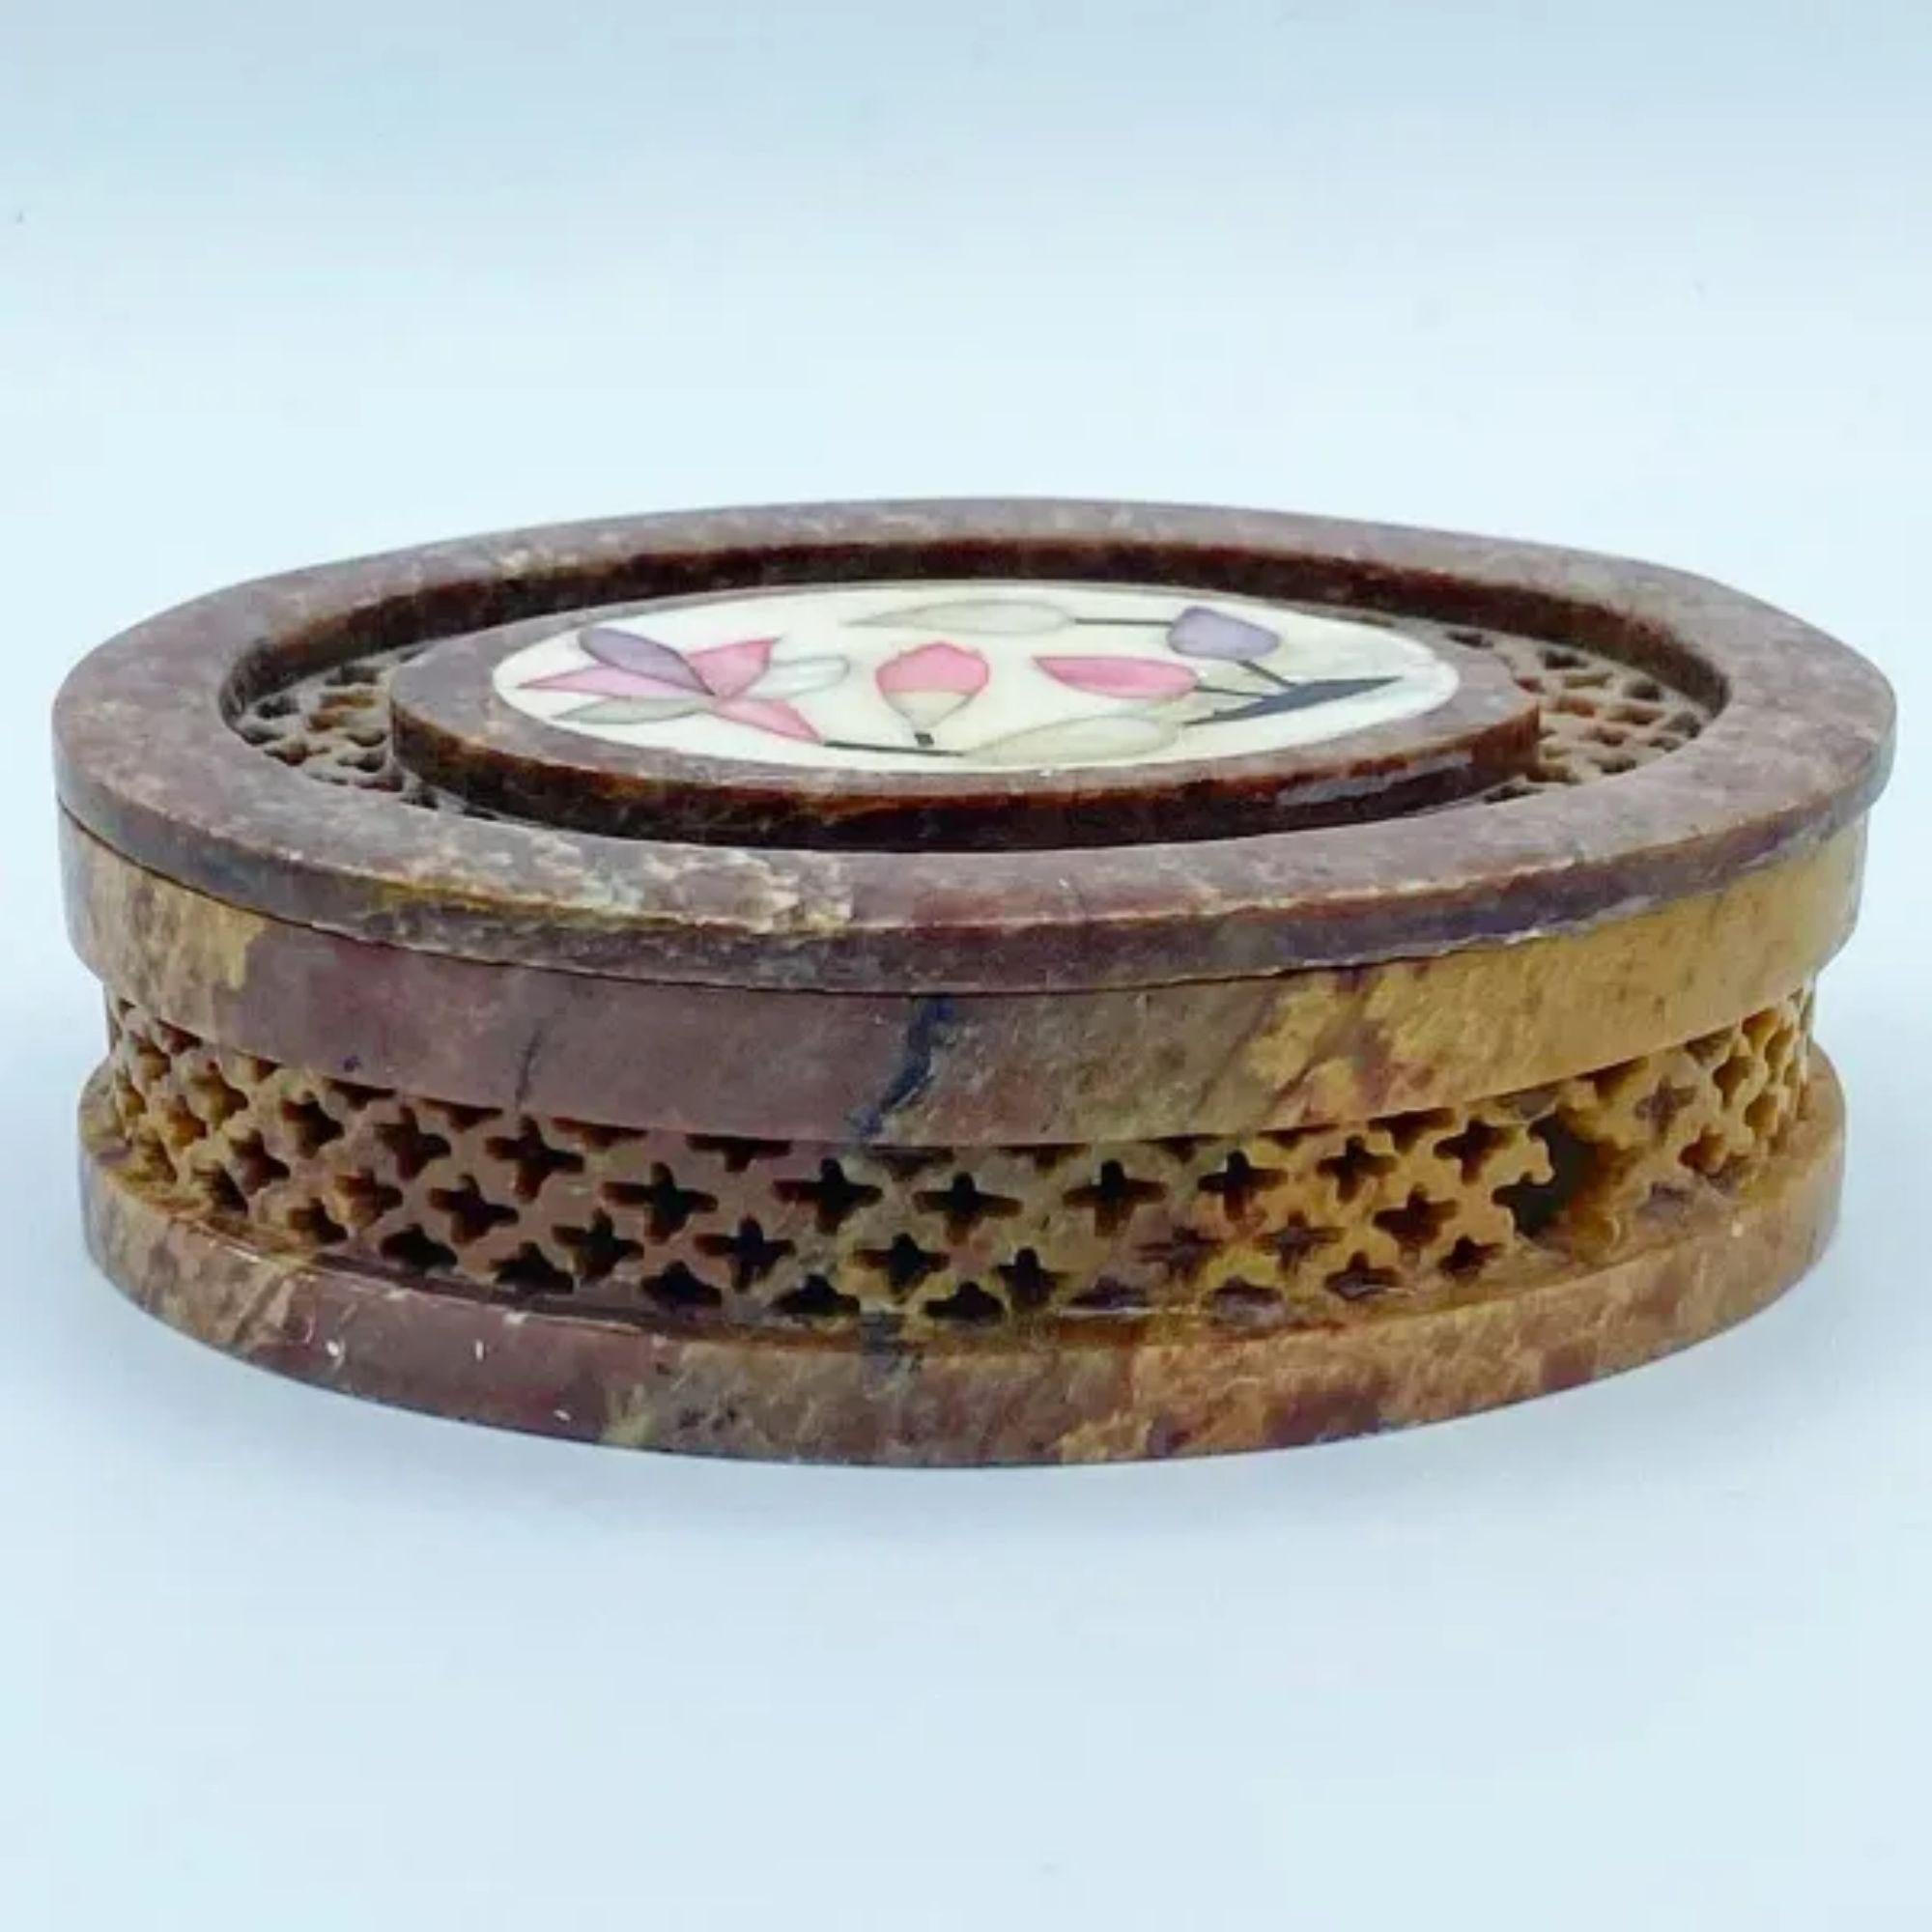 Handcrafted Natural Marble Trinket Box with Mother of Pearl Inlay

Additional information: 
Material: Marble
Color: Brown
Style: Mid-Century, Vintage
Time Period: 1960s
Dimension: 4” L x 3” W x 1.25” H